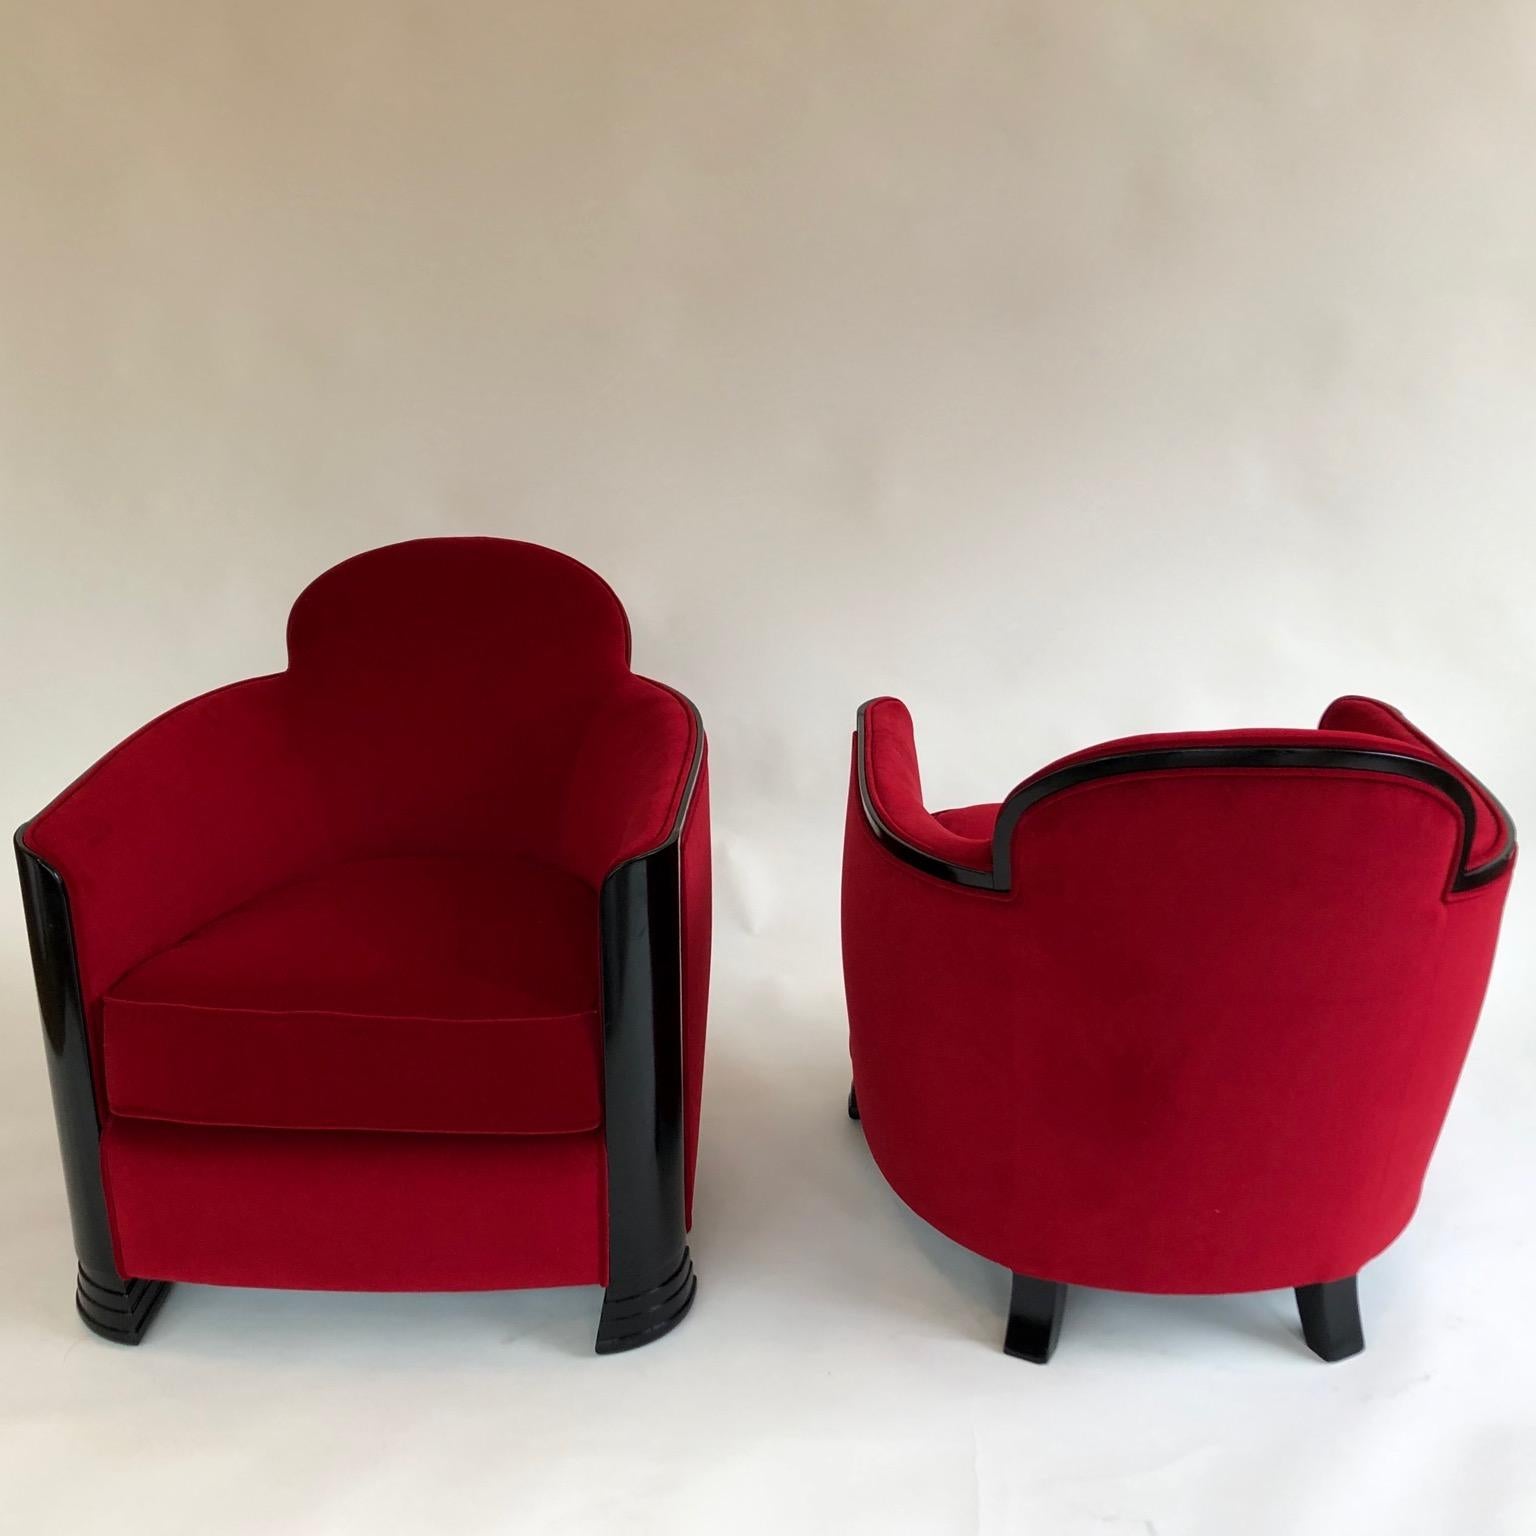 Velvet Black and Red Art Deco Modernist Pair of Armchairs, Club Chairs, France, 1930s